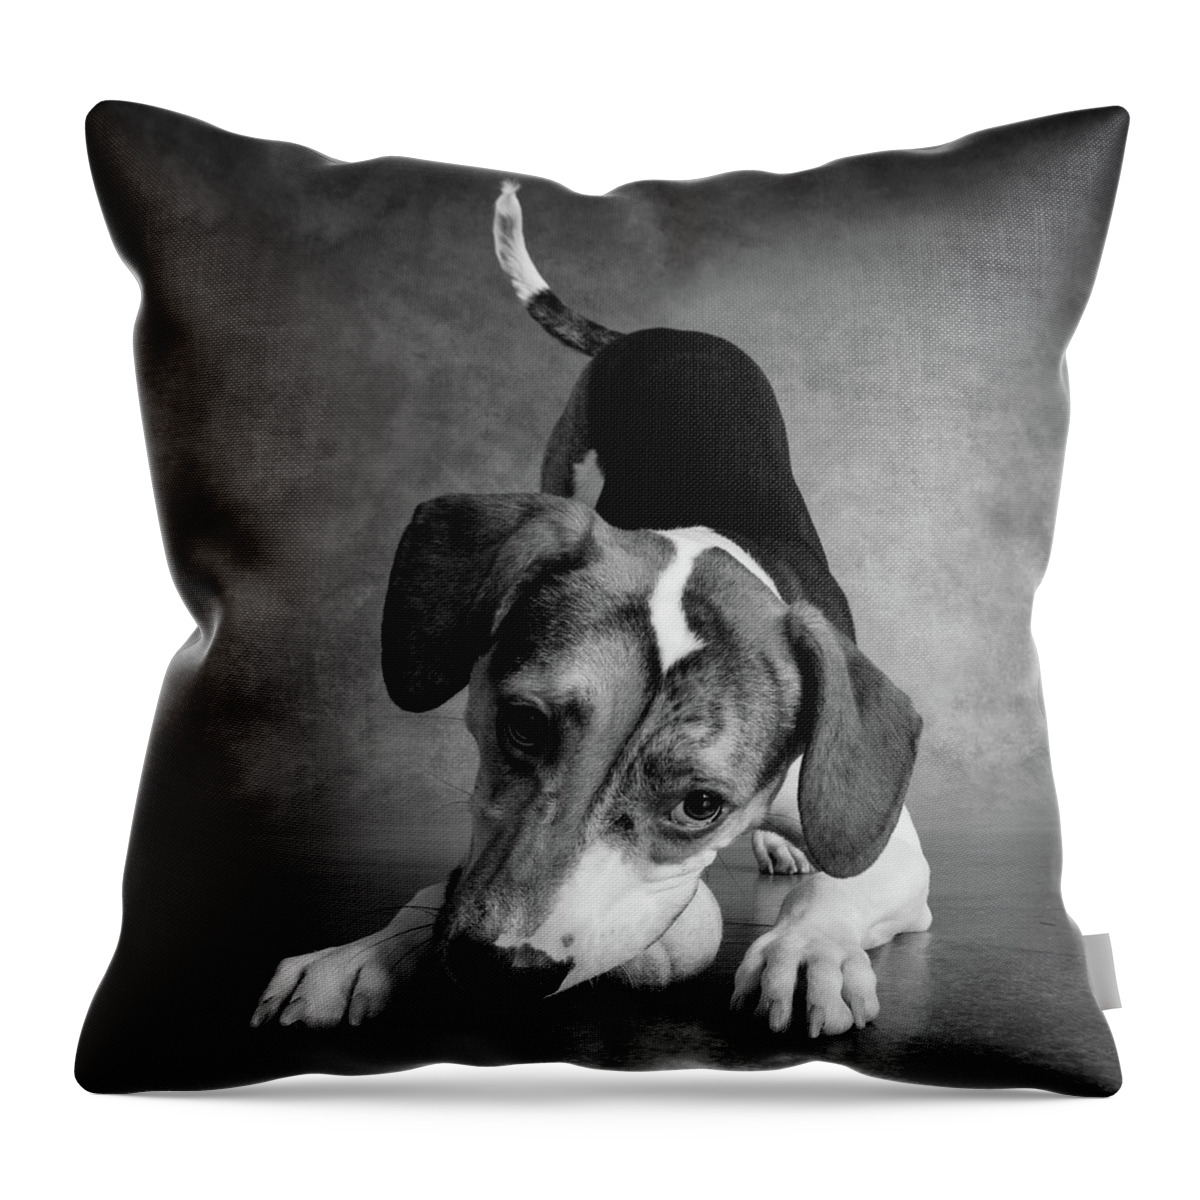 Photography Throw Pillow featuring the photograph Portrait Of A Mixed Dog Playing #1 by Animal Images